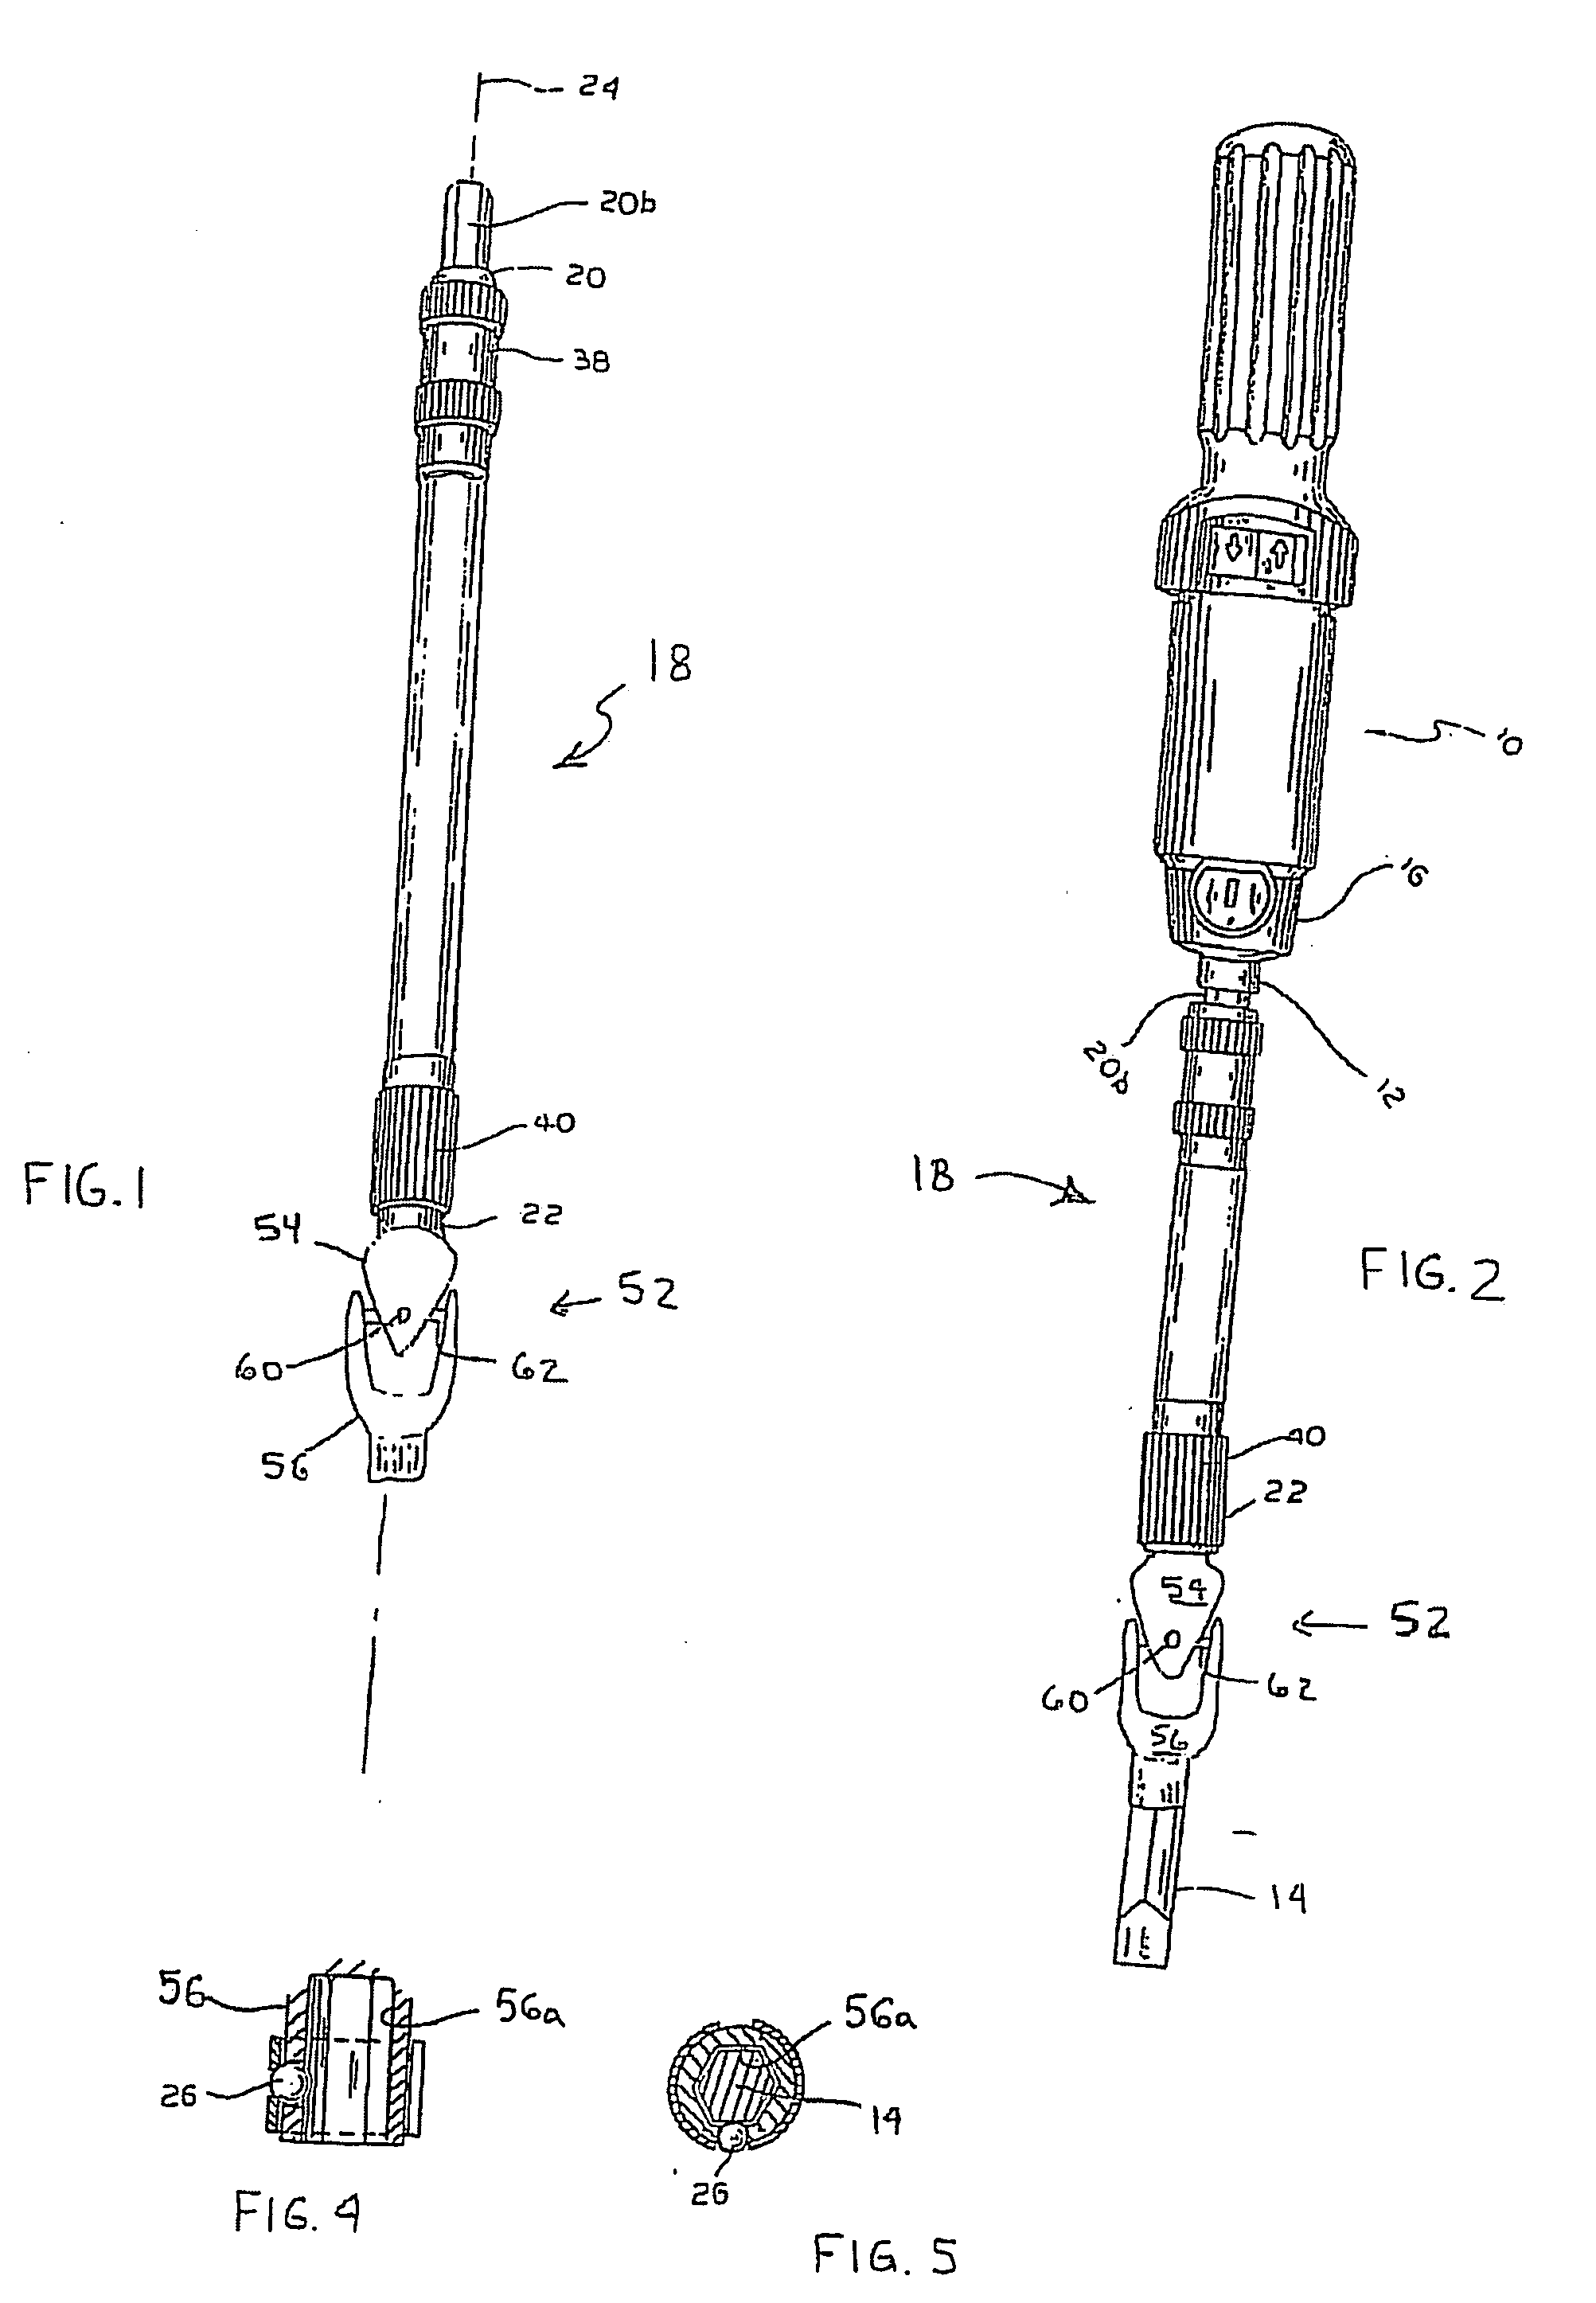 Extension shaft for holding a tool for rotary driven motion